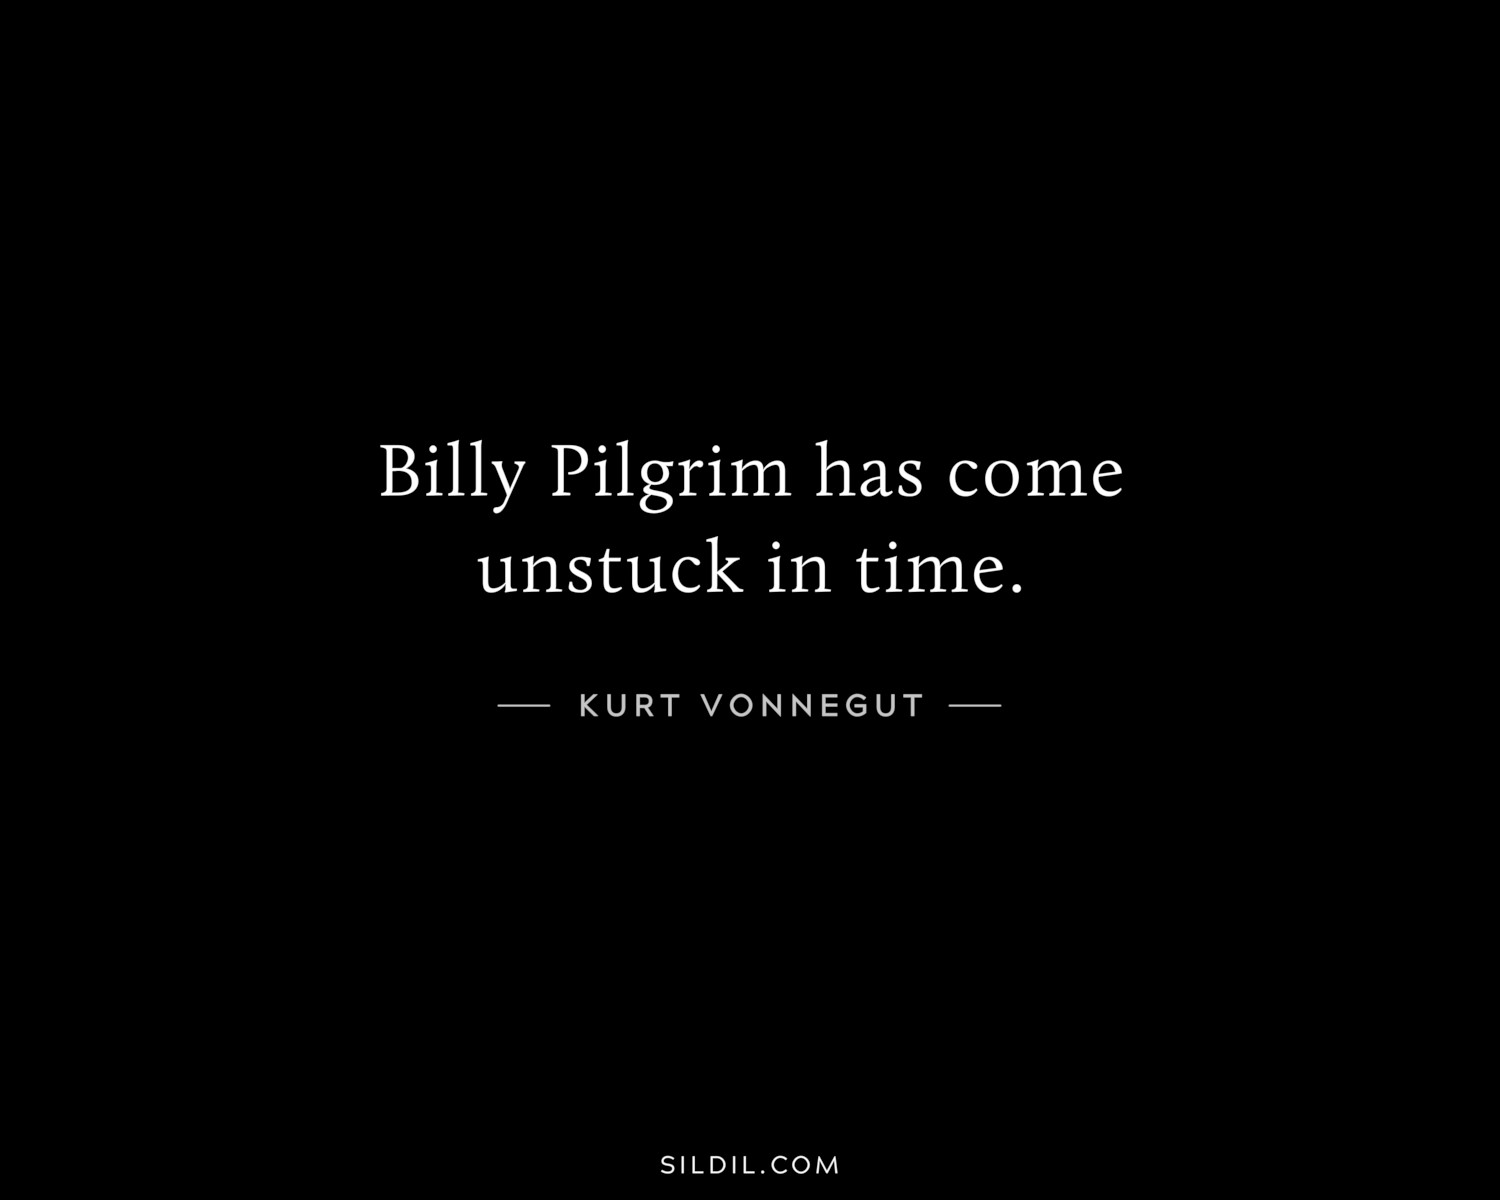 Billy Pilgrim has come unstuck in time.